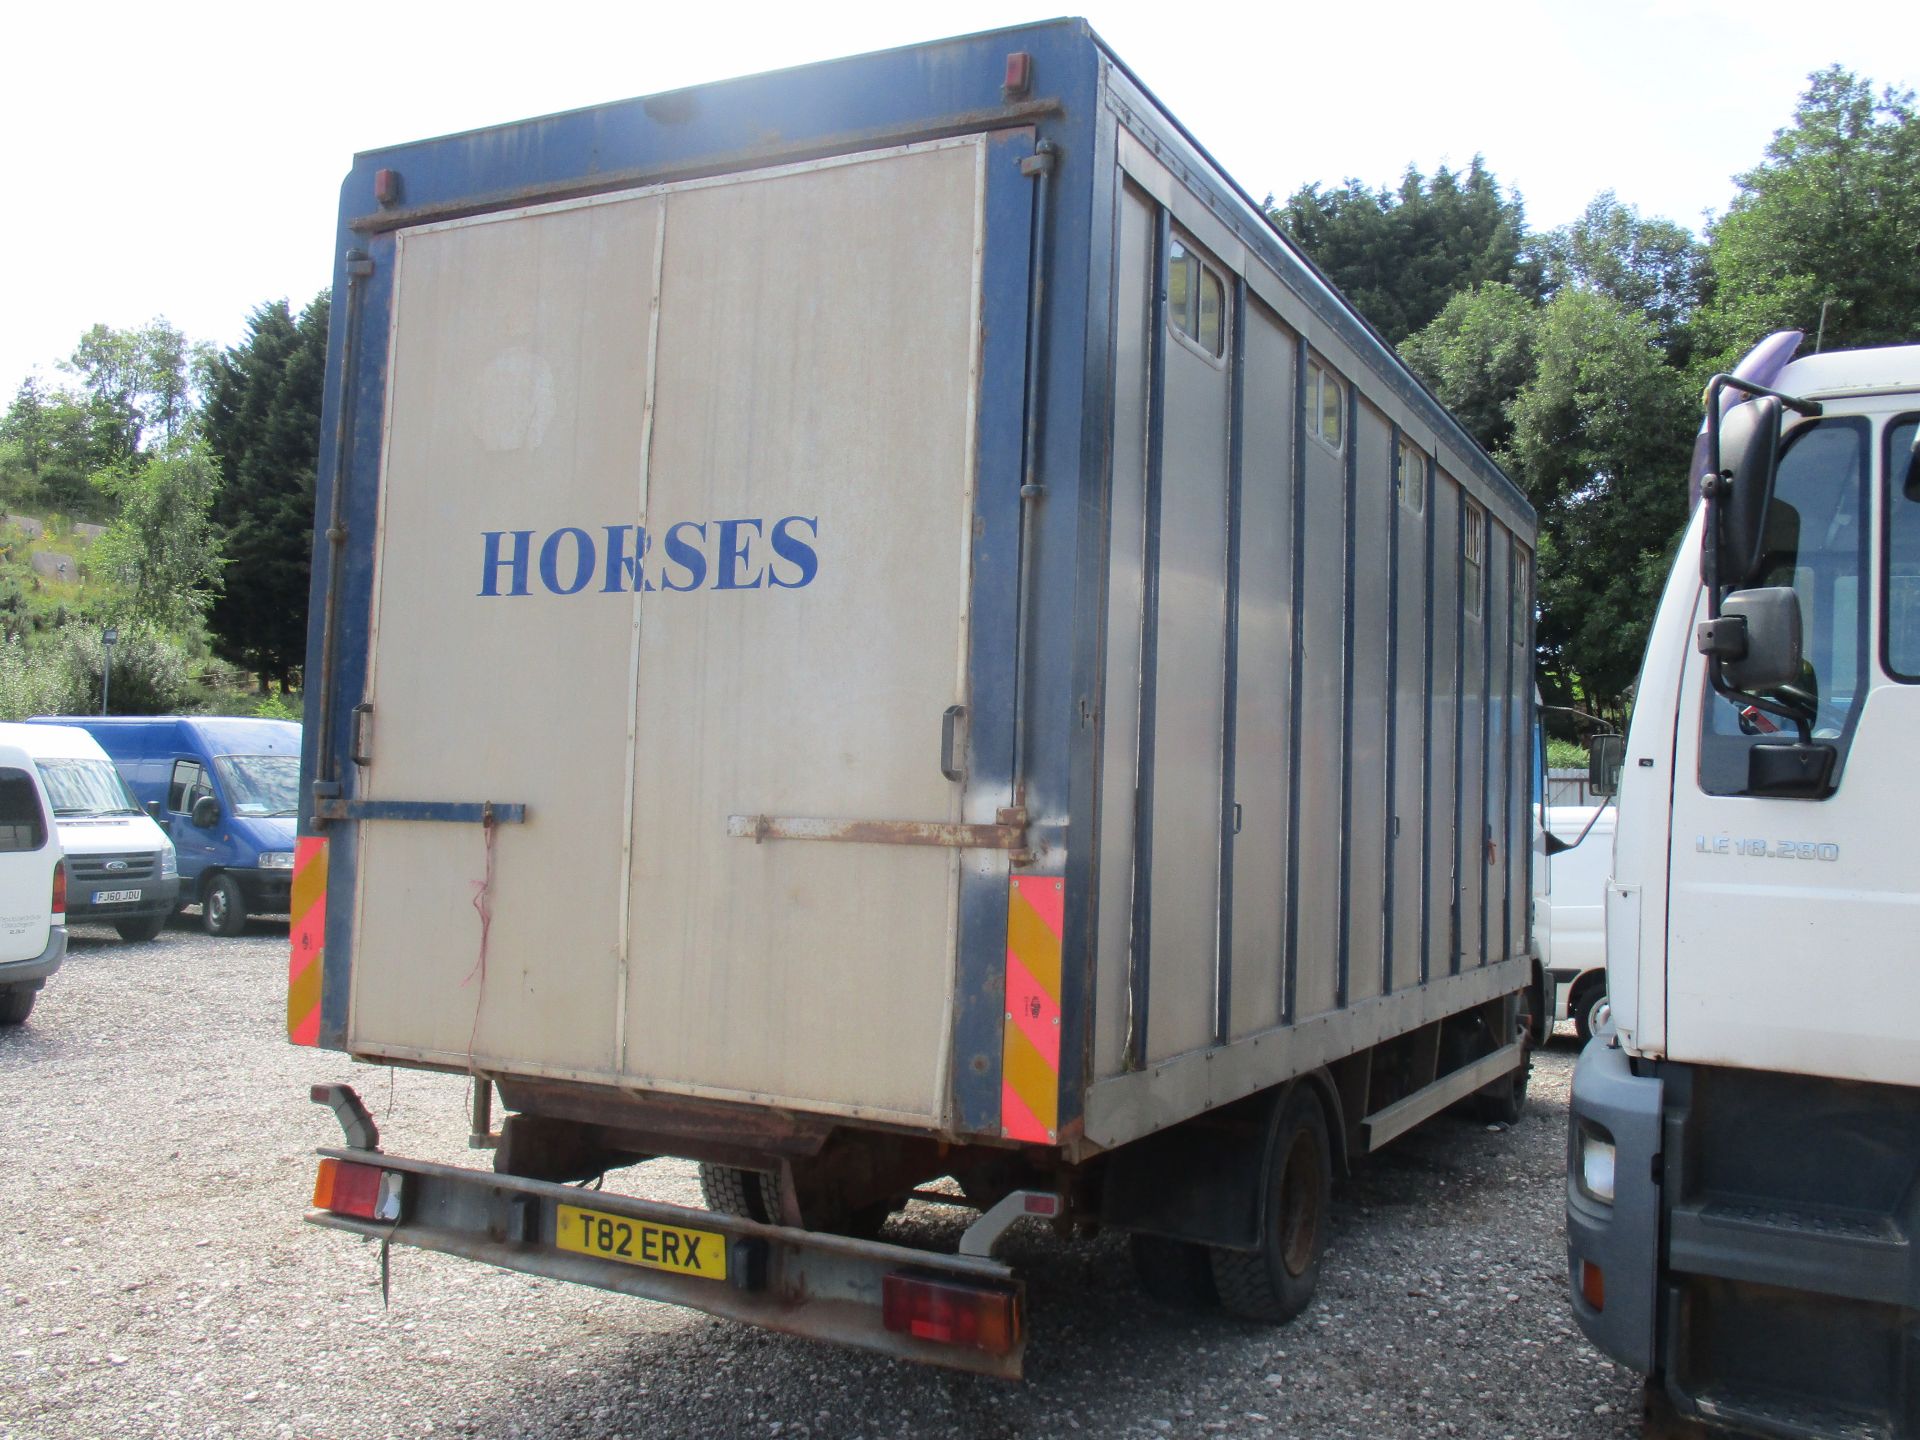 99/T IVECO-FORD NEW CARGO - 5861cc Diesel Automatic HORSEBOX - Image 3 of 3